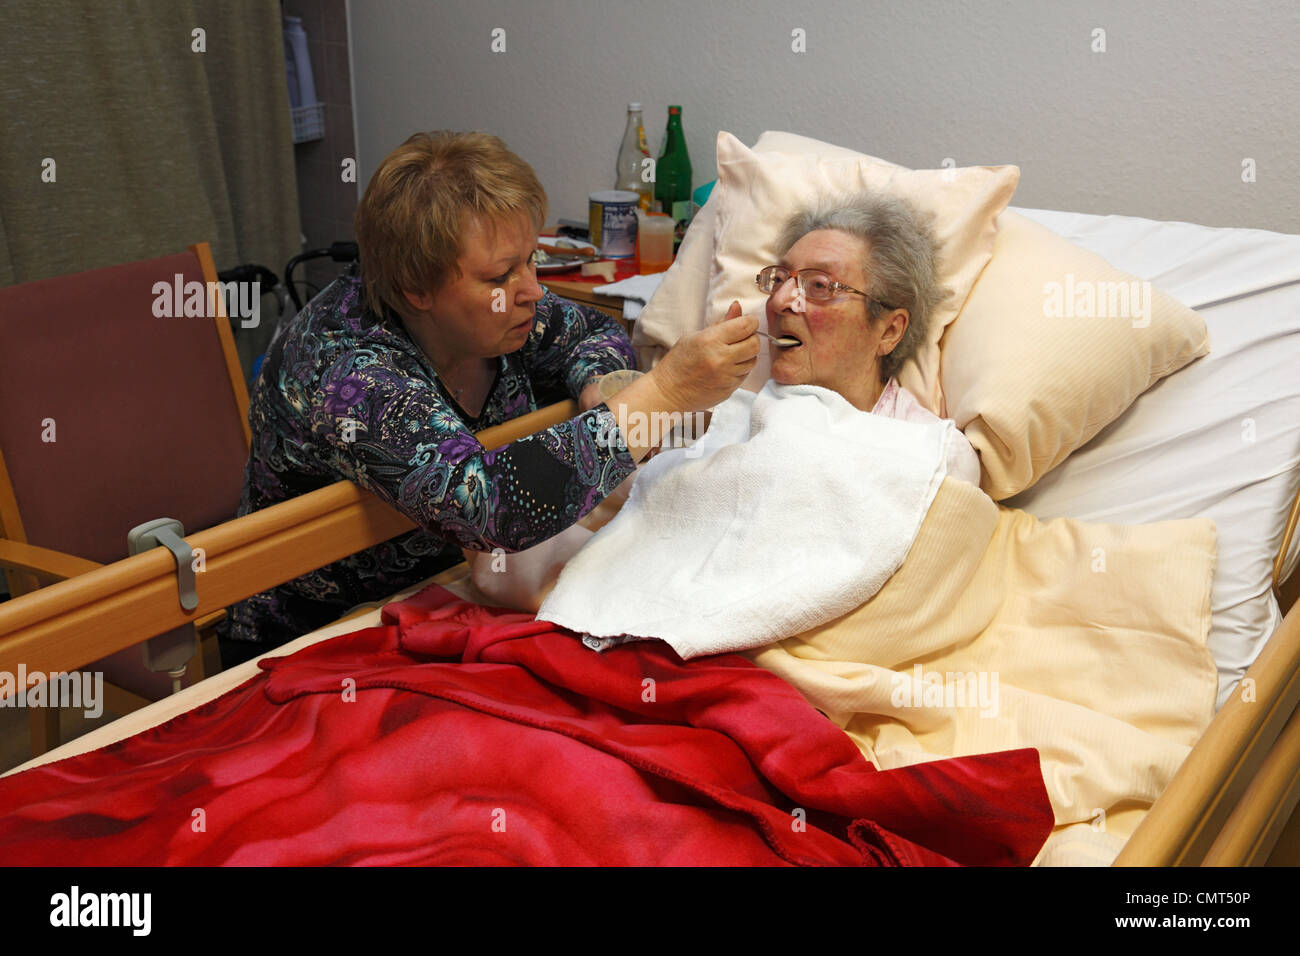 people, old age, retirement home, Altenzentrum der St. Clemens Hospitale in Sterkrade, older woman lies in a sickbed, aged 70 to 85 years, physical handicap, dementia illness, nurse feeds her, aged 50 to 60 years, Waltraut, Elke, D-Oberhausen, Ruhr area, Stock Photo